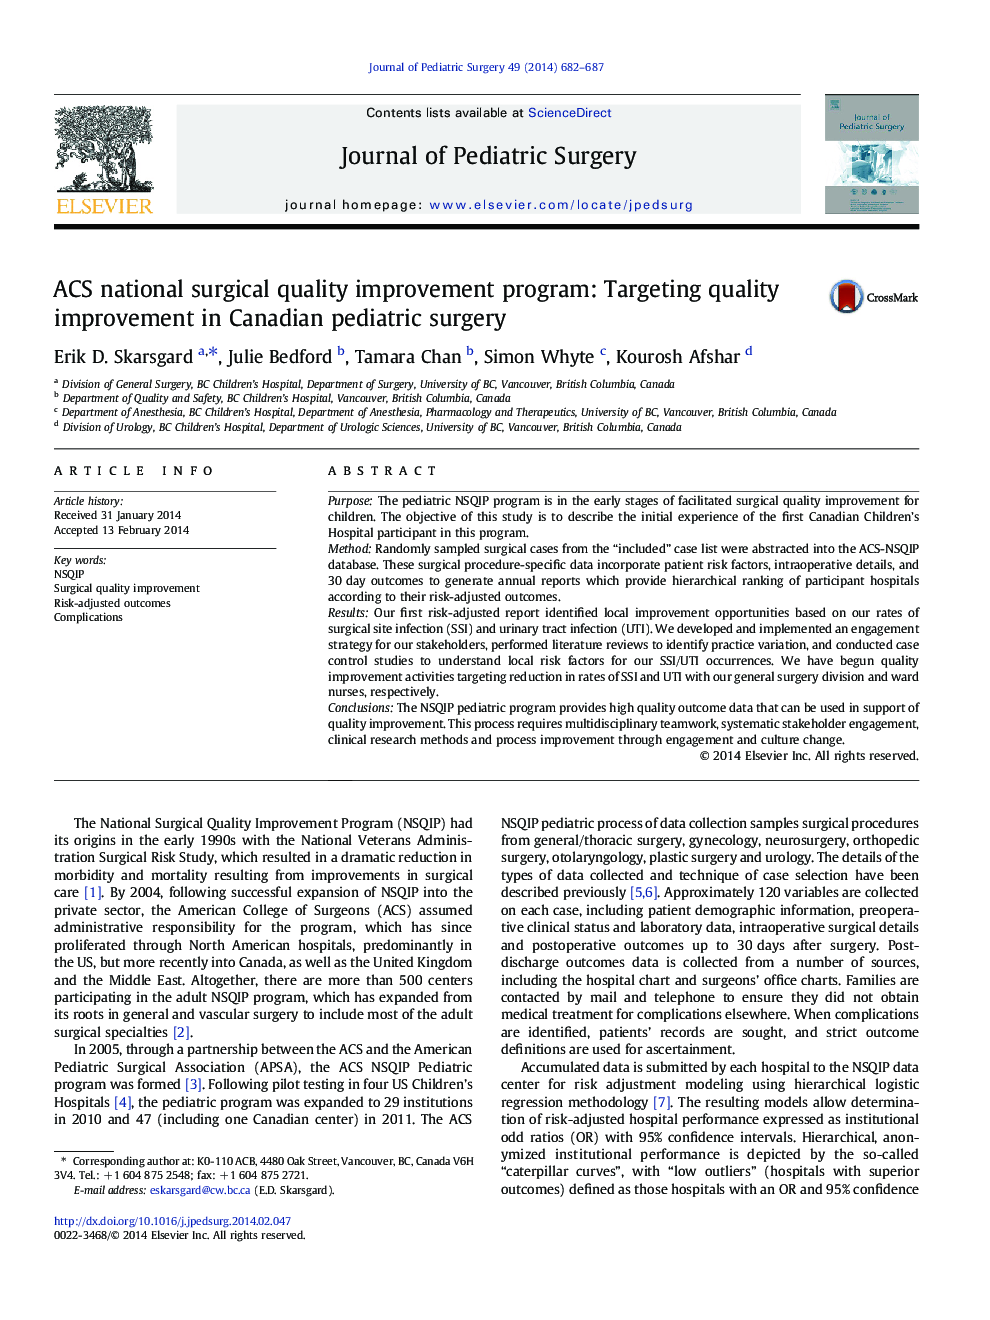 ACS national surgical quality improvement program: Targeting quality improvement in Canadian pediatric surgery